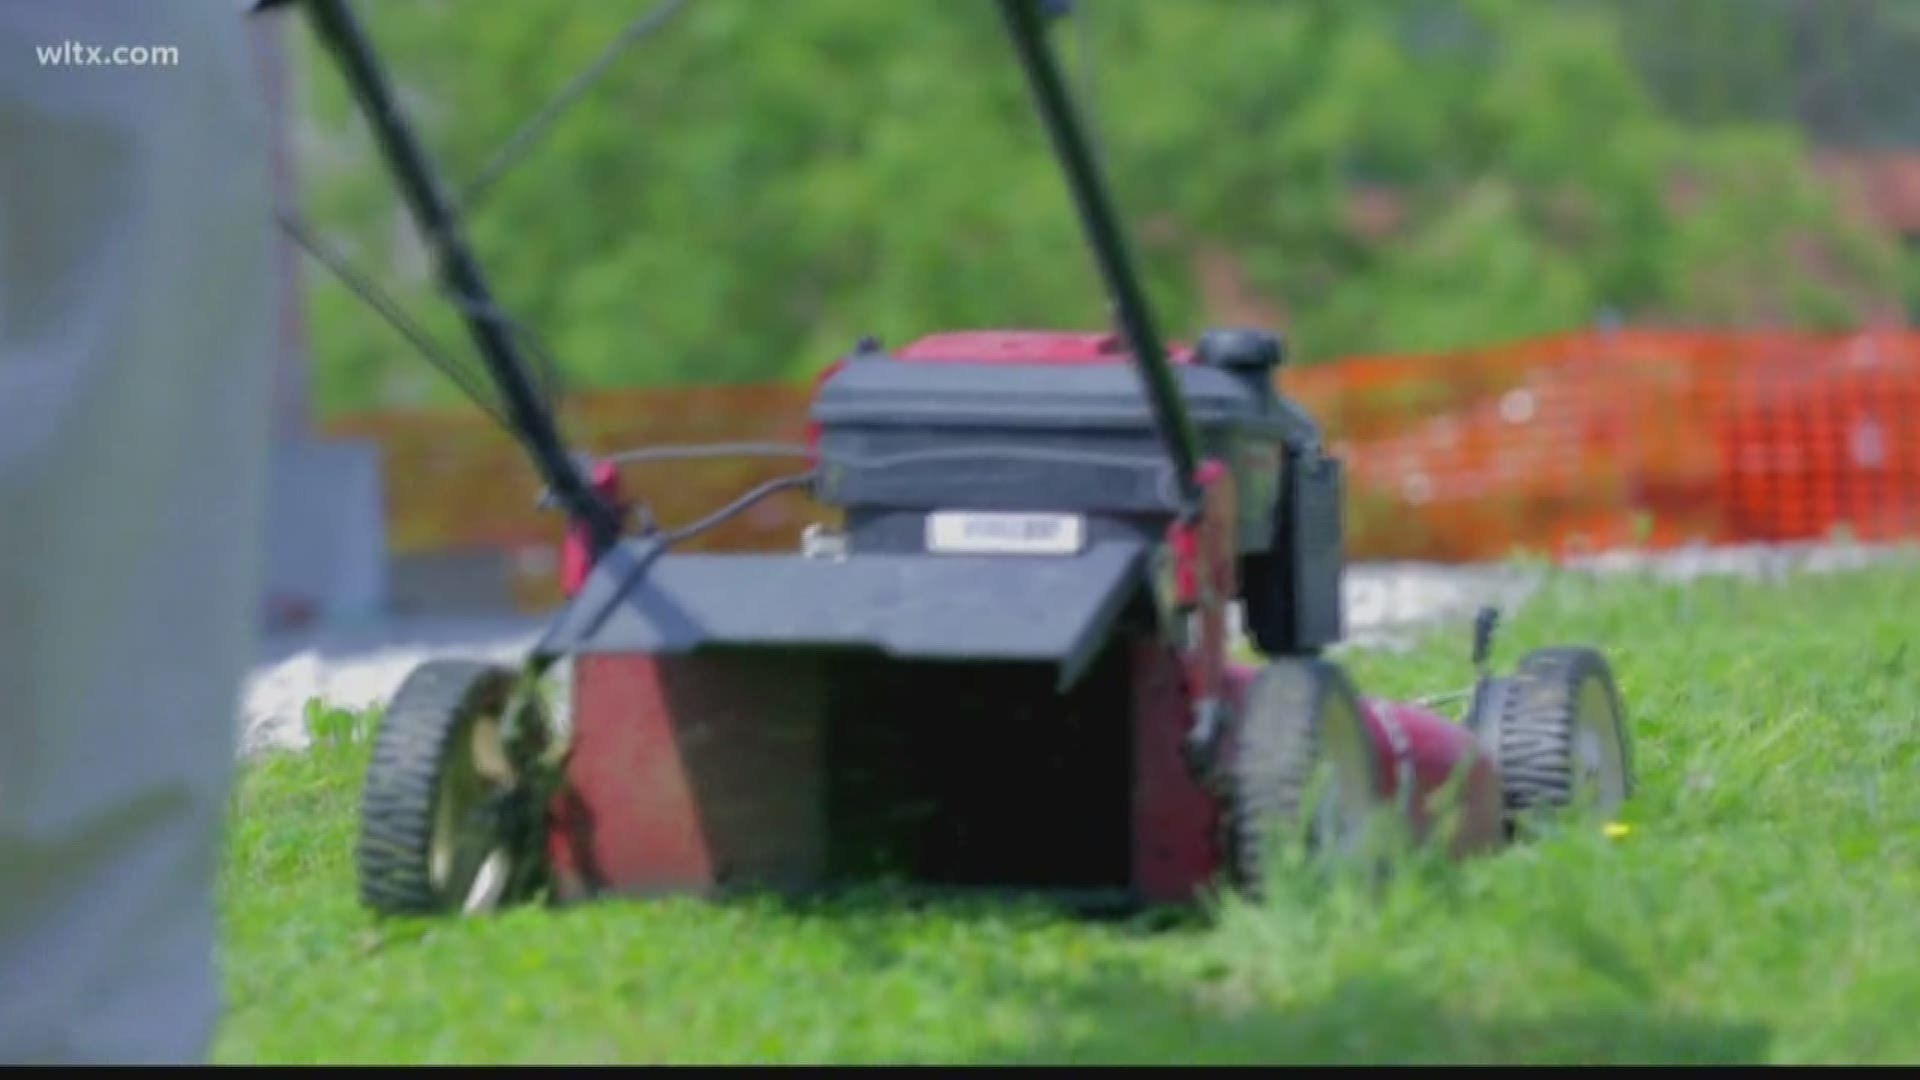 An ordinance in Irmo doesn't let kids mow lawns, and the community is confused.